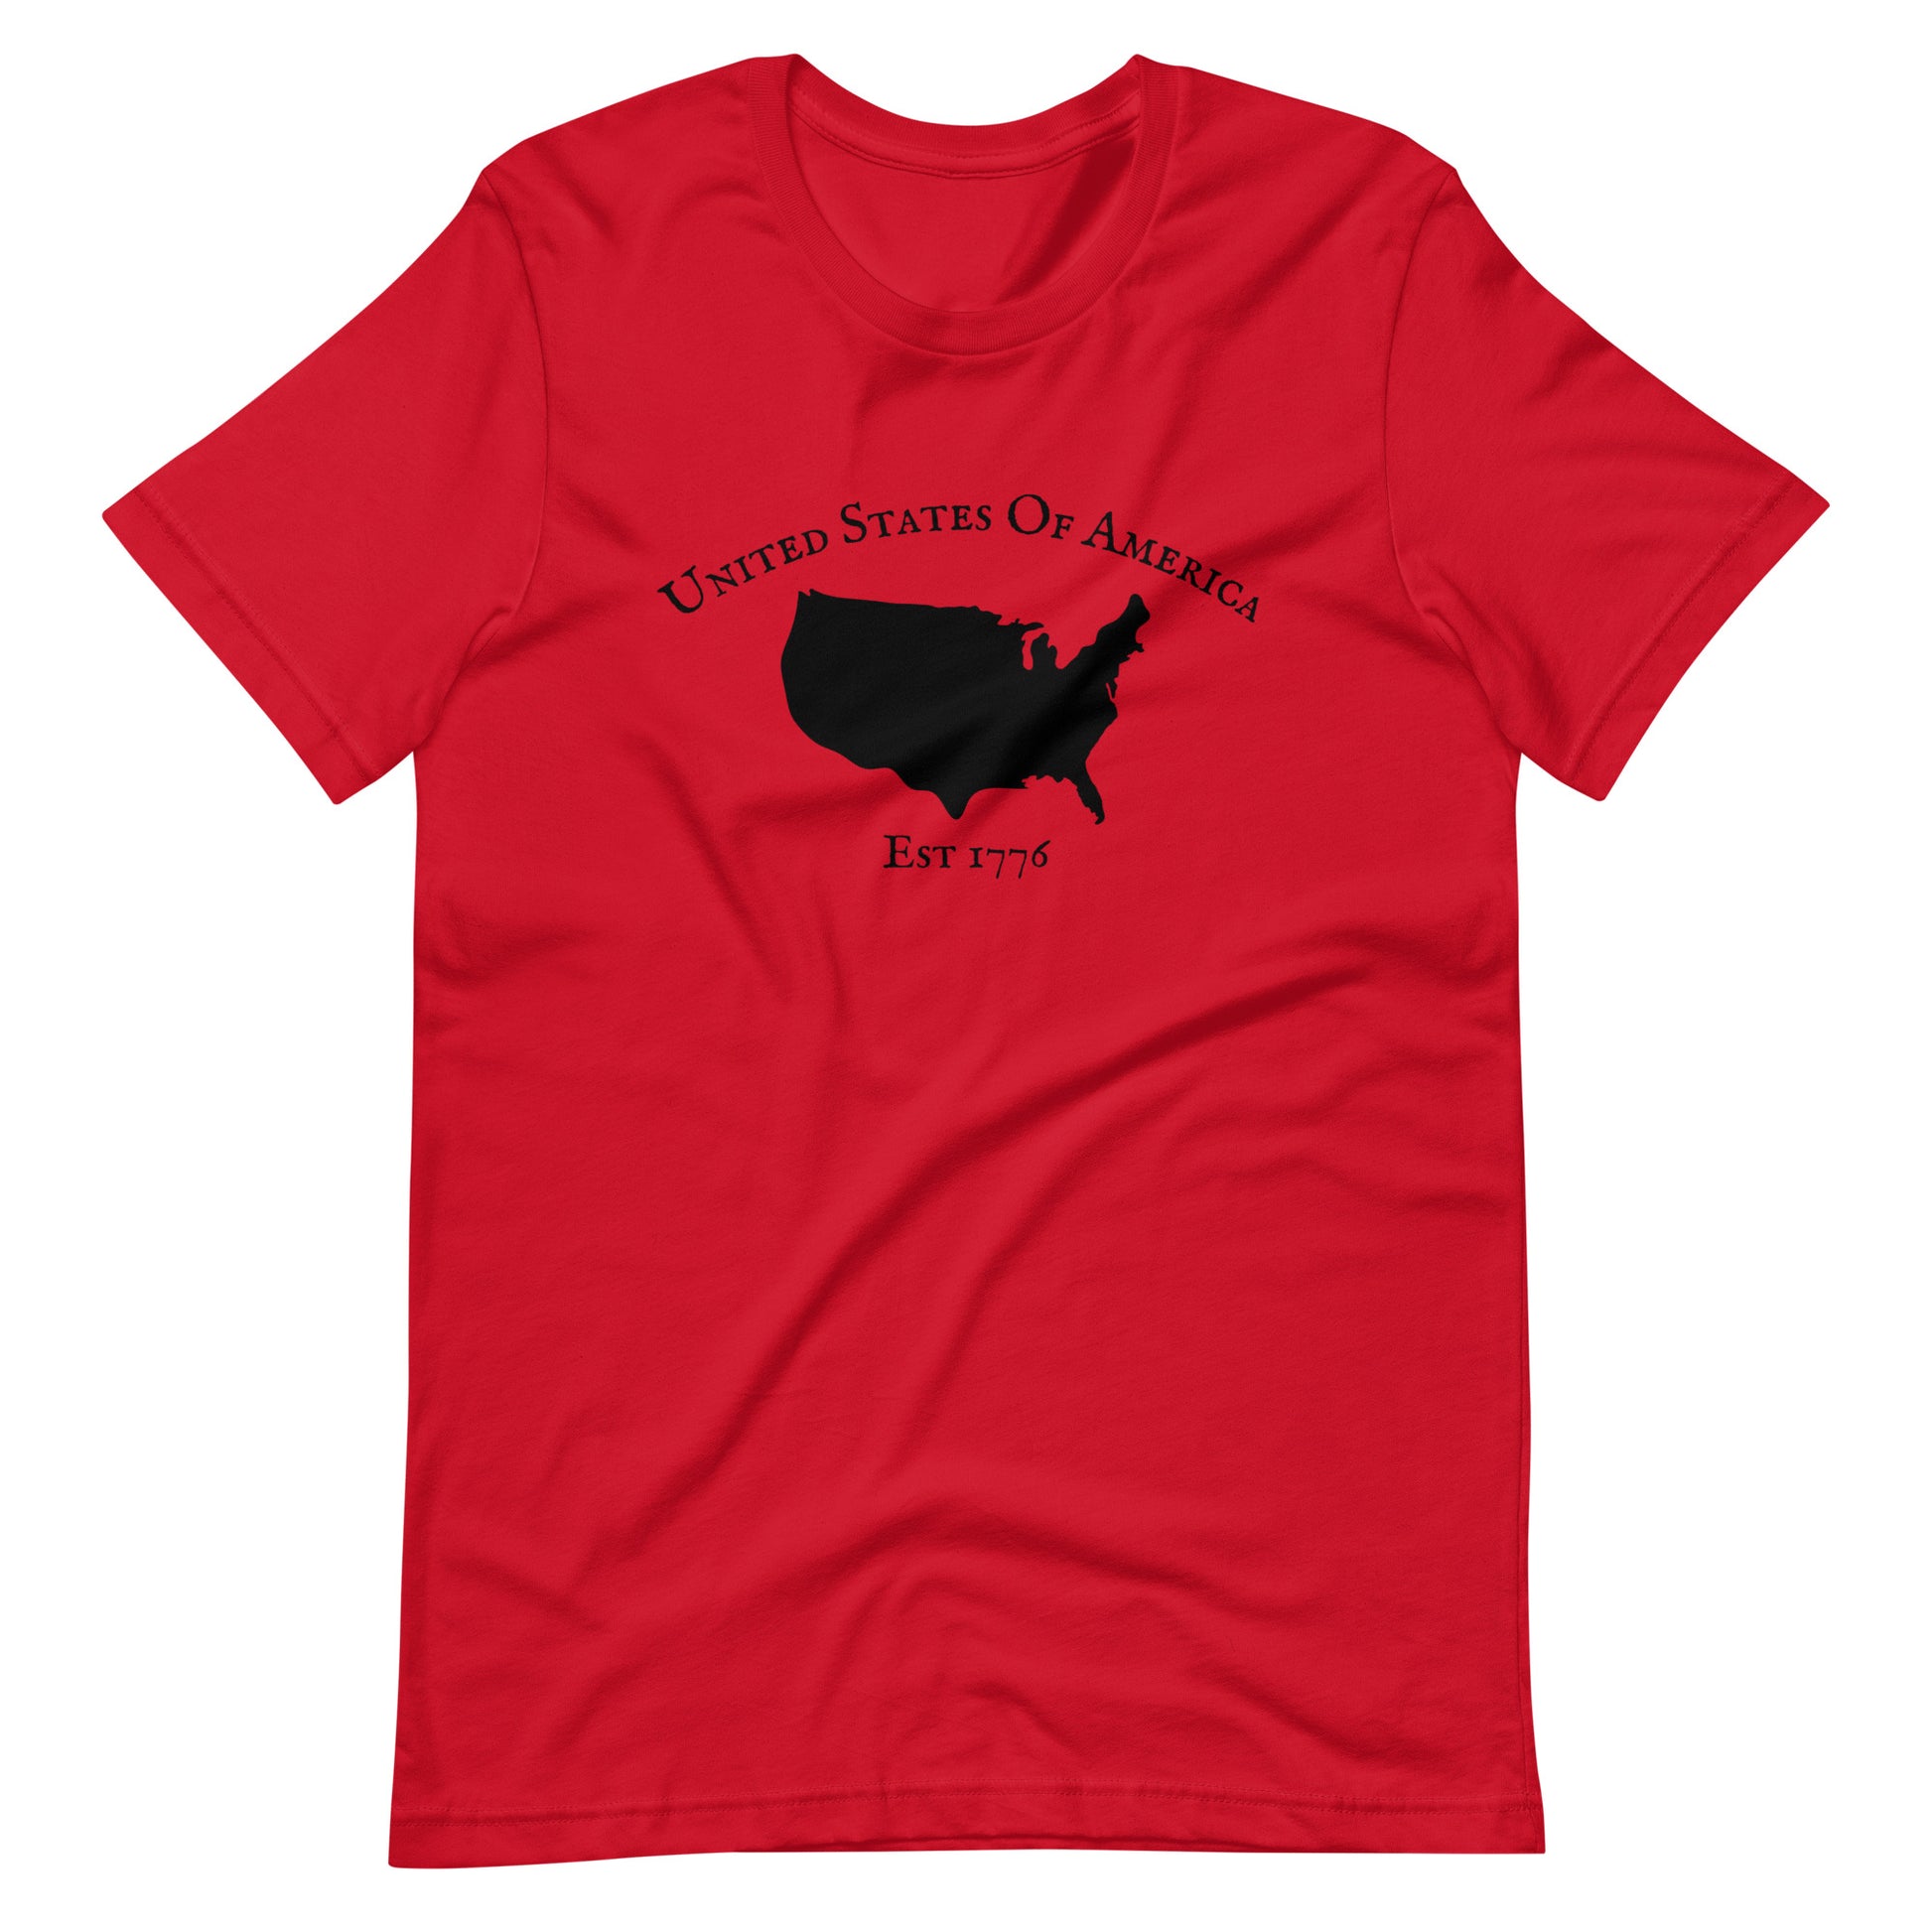 "United States Of America Est. 1776" T-Shirt - Weave Got Gifts - Unique Gifts You Won’t Find Anywhere Else!